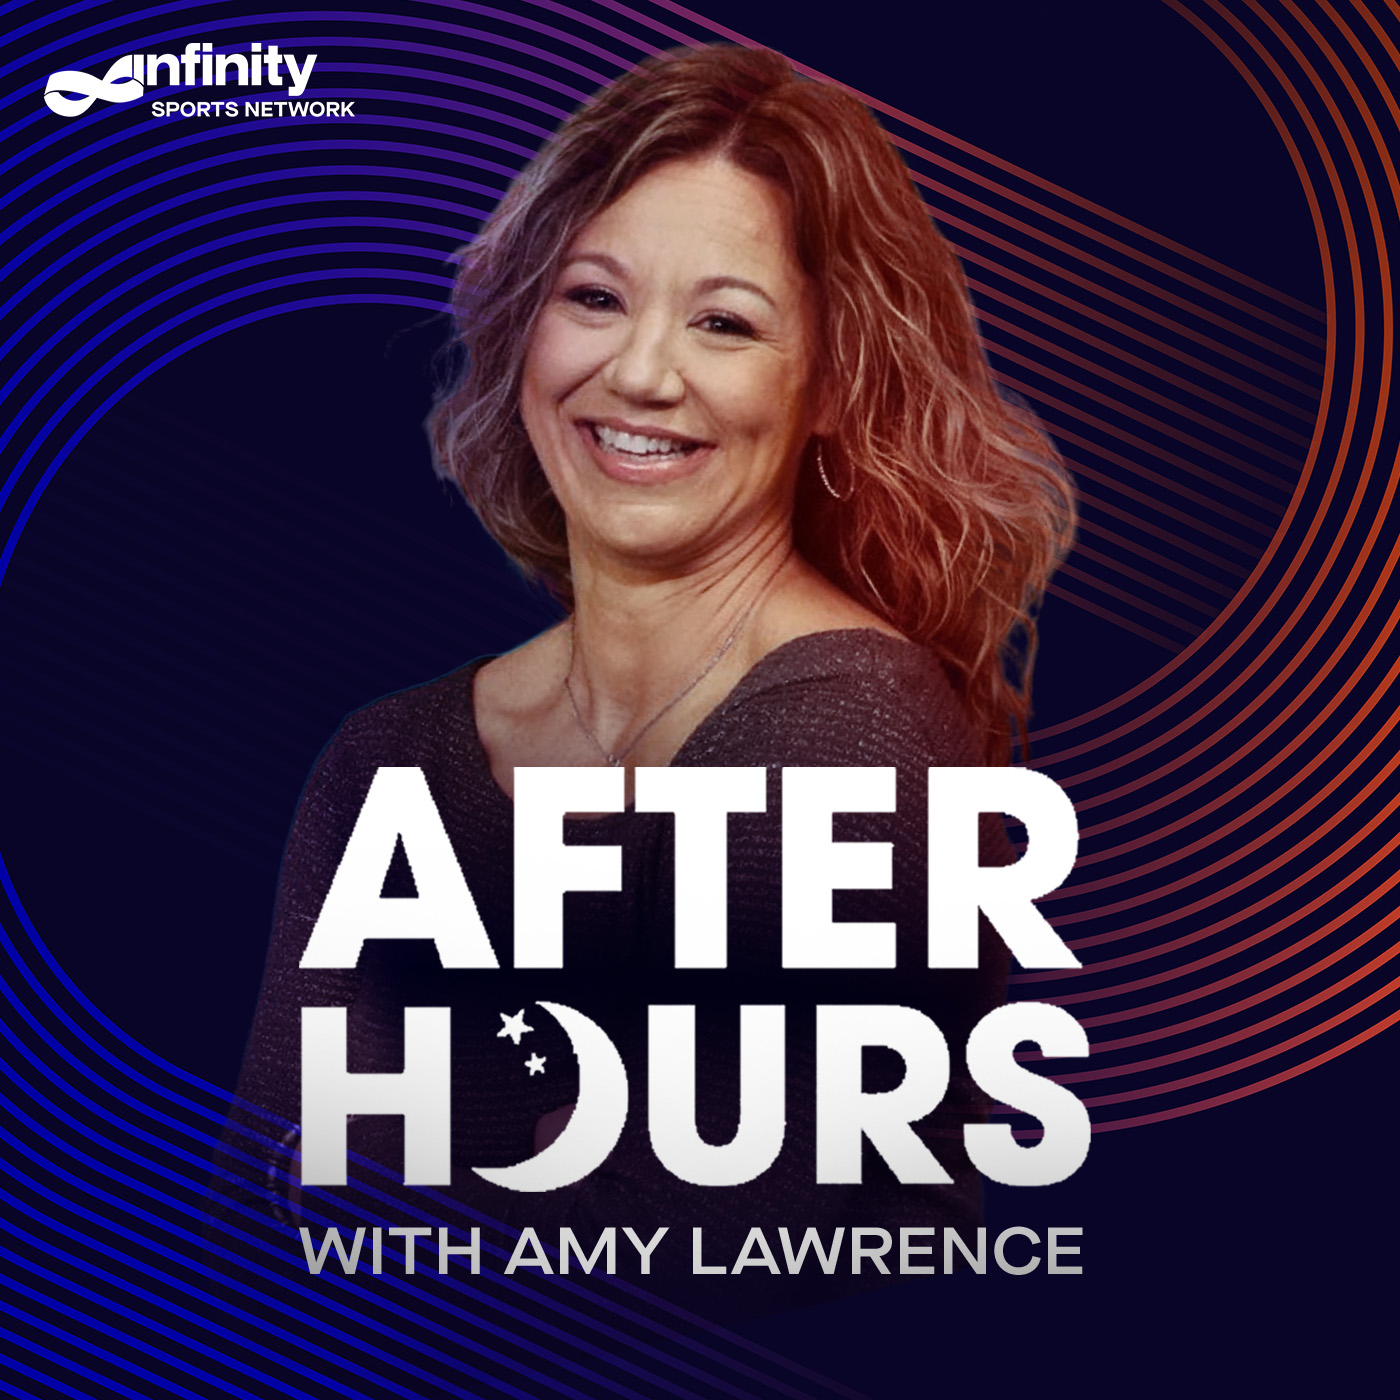 10-25-21 After Hours with Amy Lawrence PODCAST: Hour 2